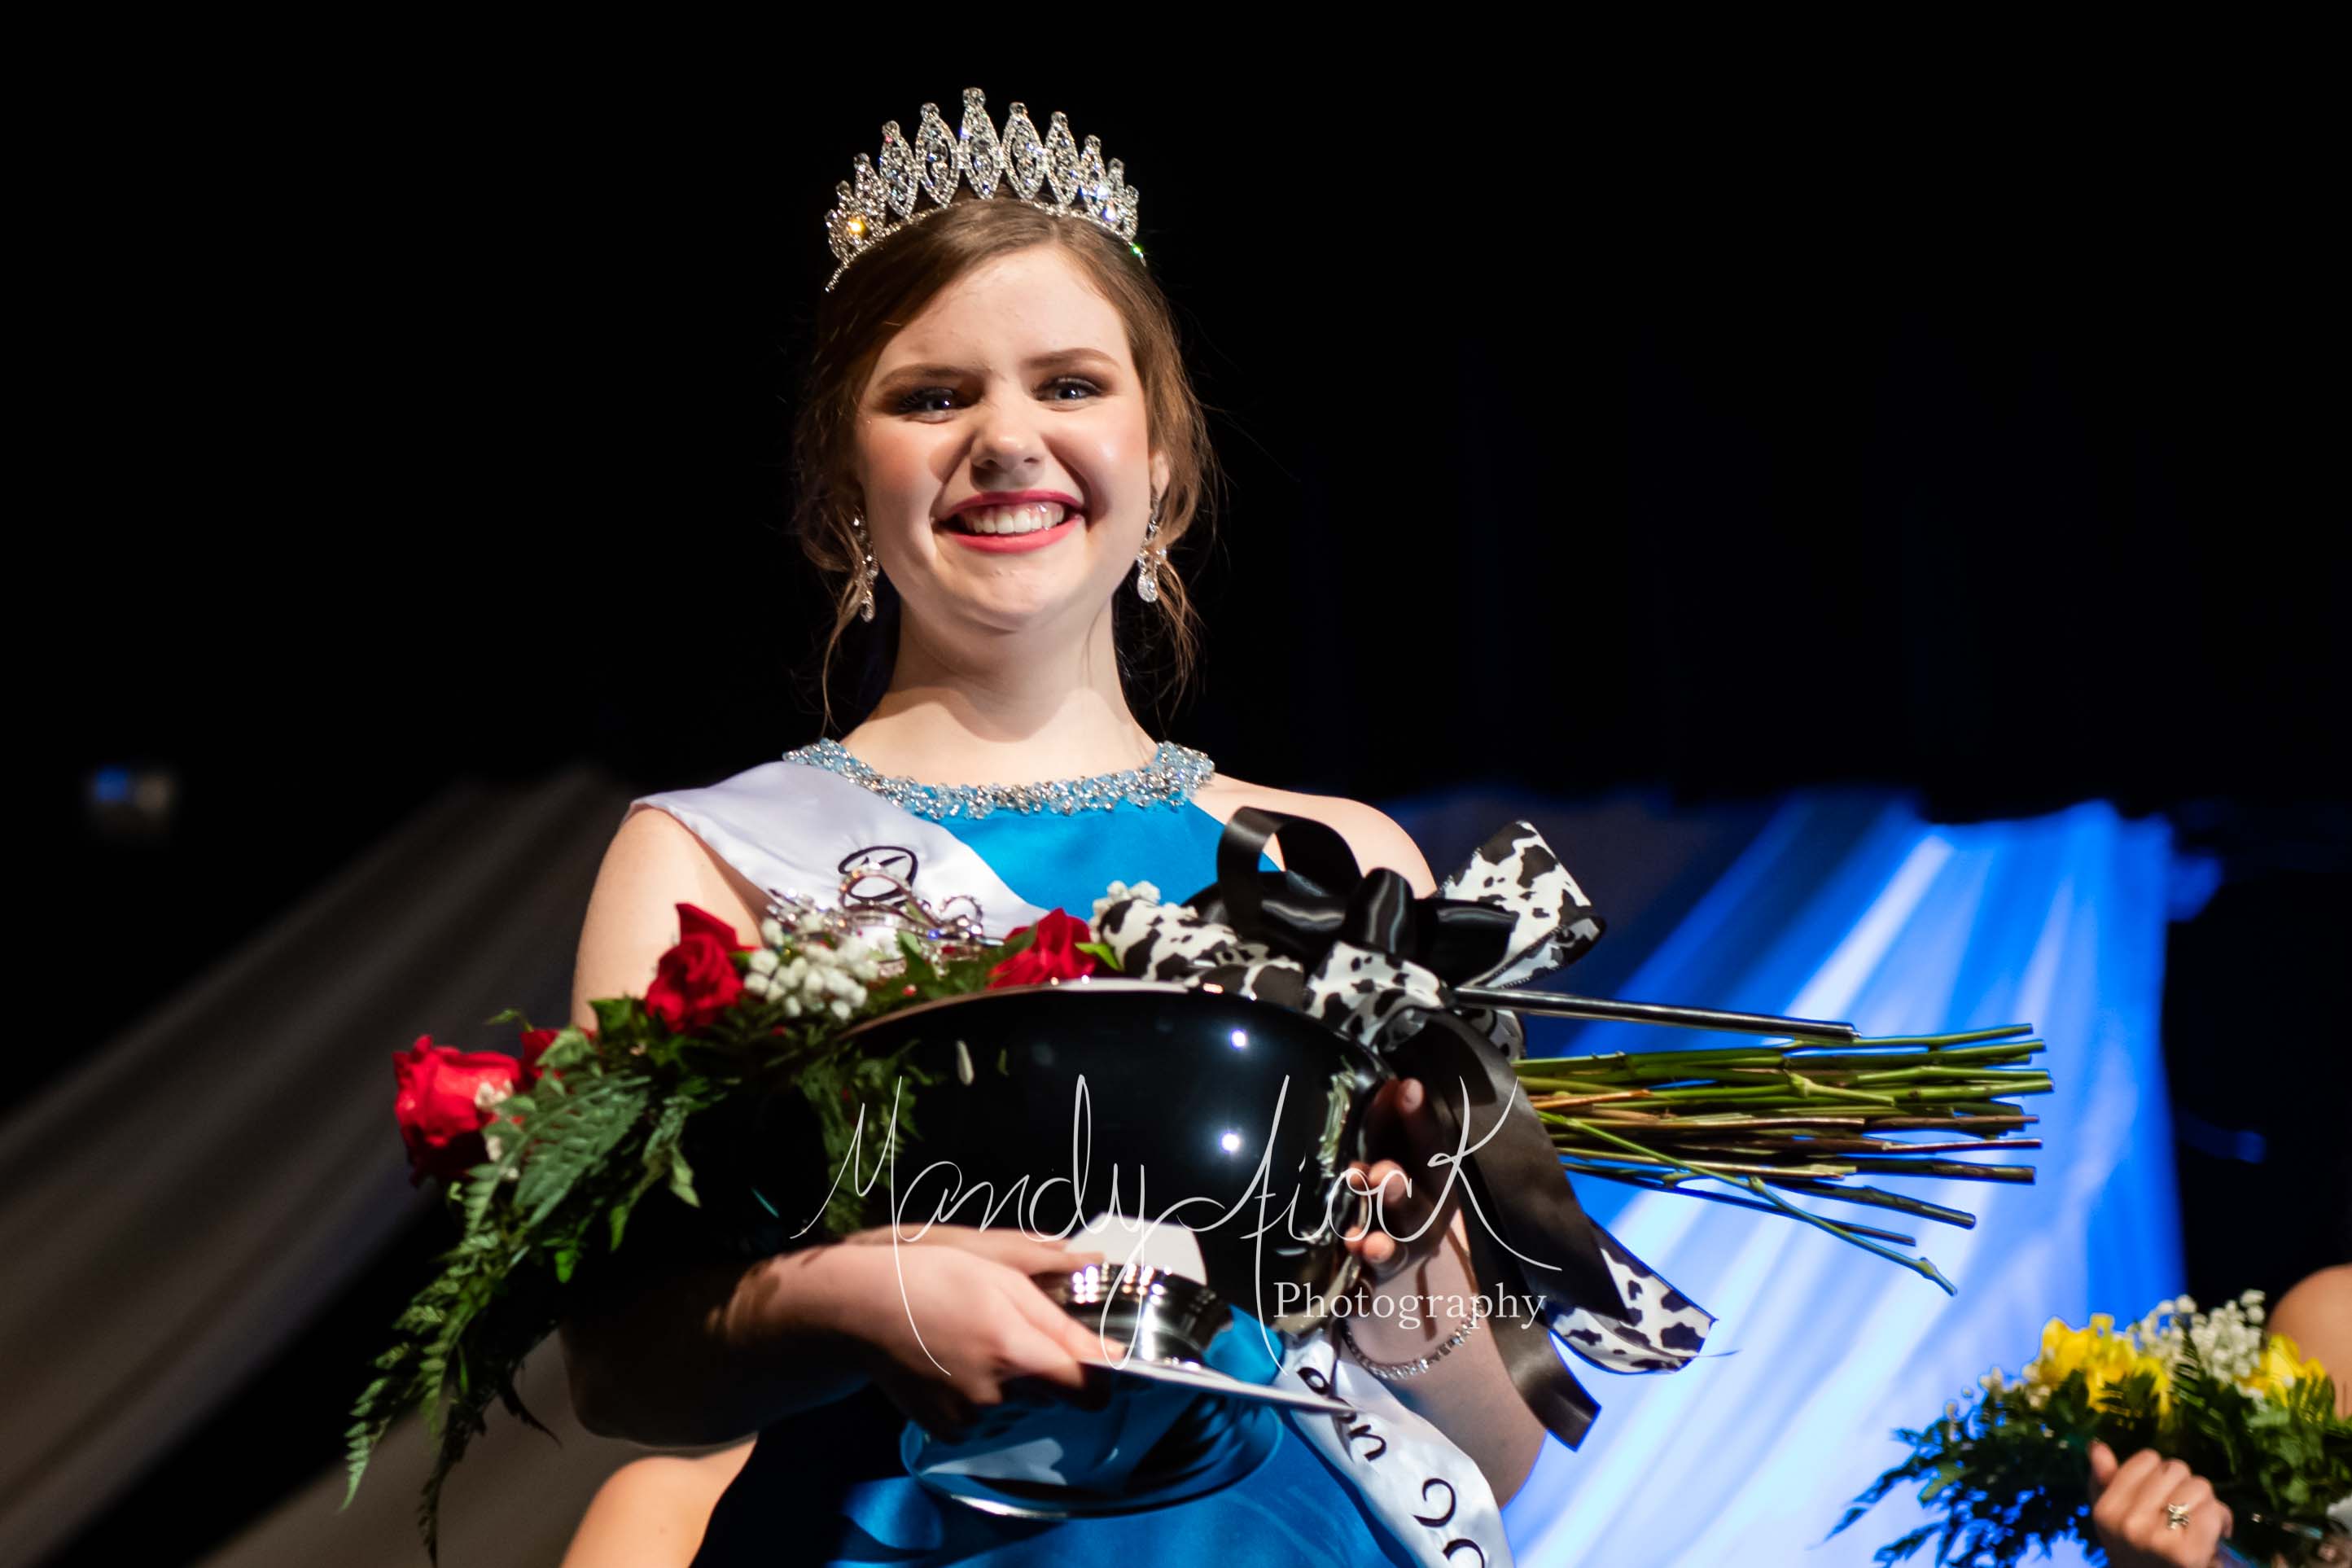 Photos from the 2019 Hopkins County Dairy Festival Pageant by Mandy Fiock Photography!